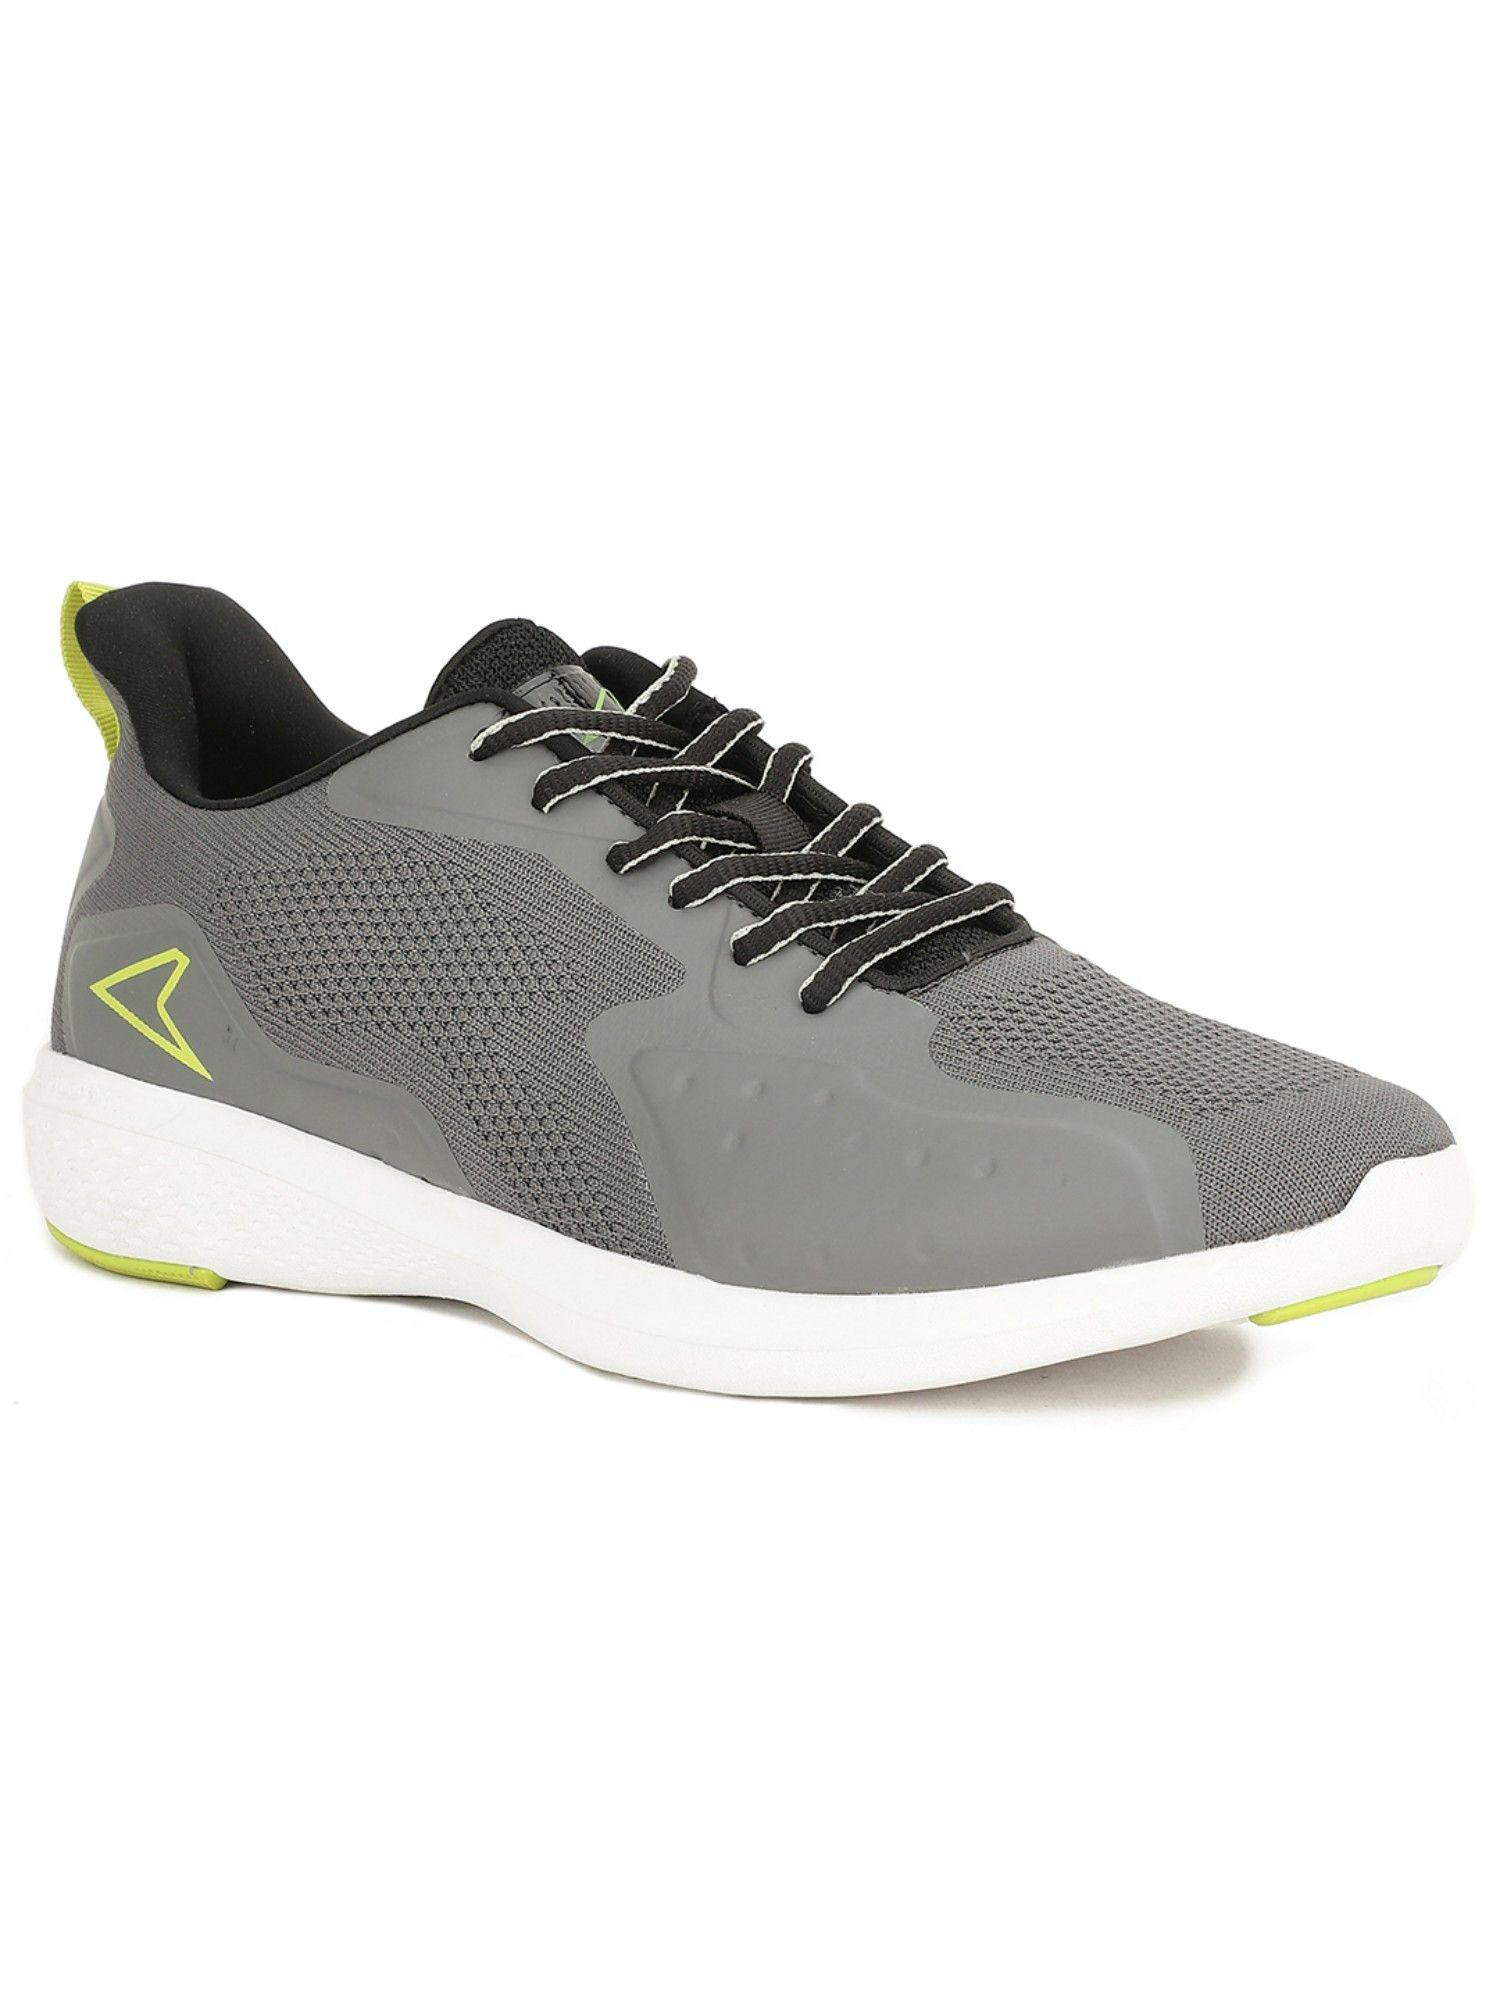 training-&-gym-shoes-for-men-(grey)